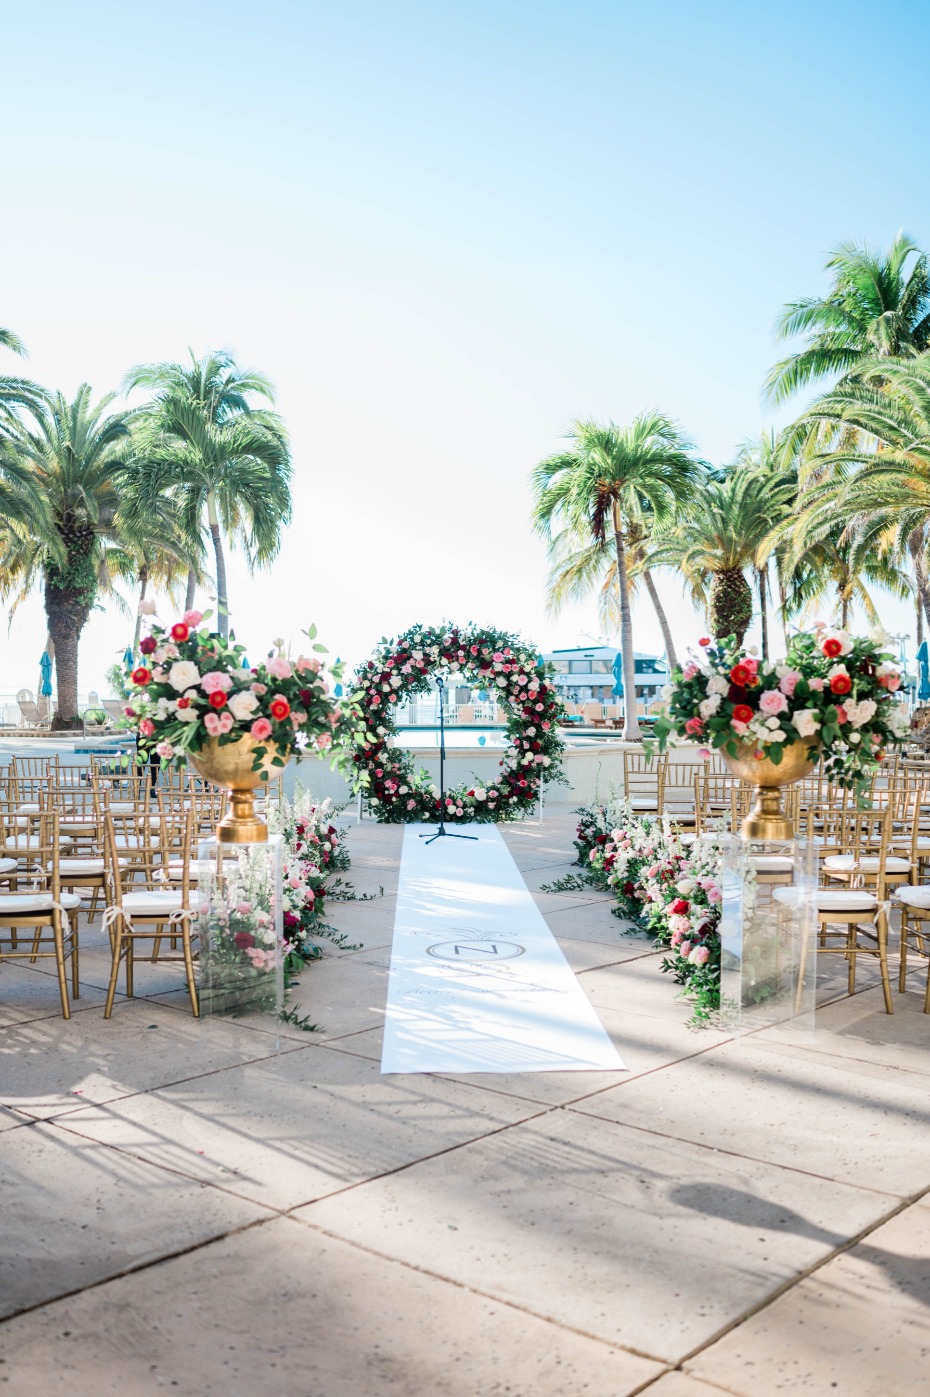 Thereâs No Better Place Than the Beach To Get Married Outdoors